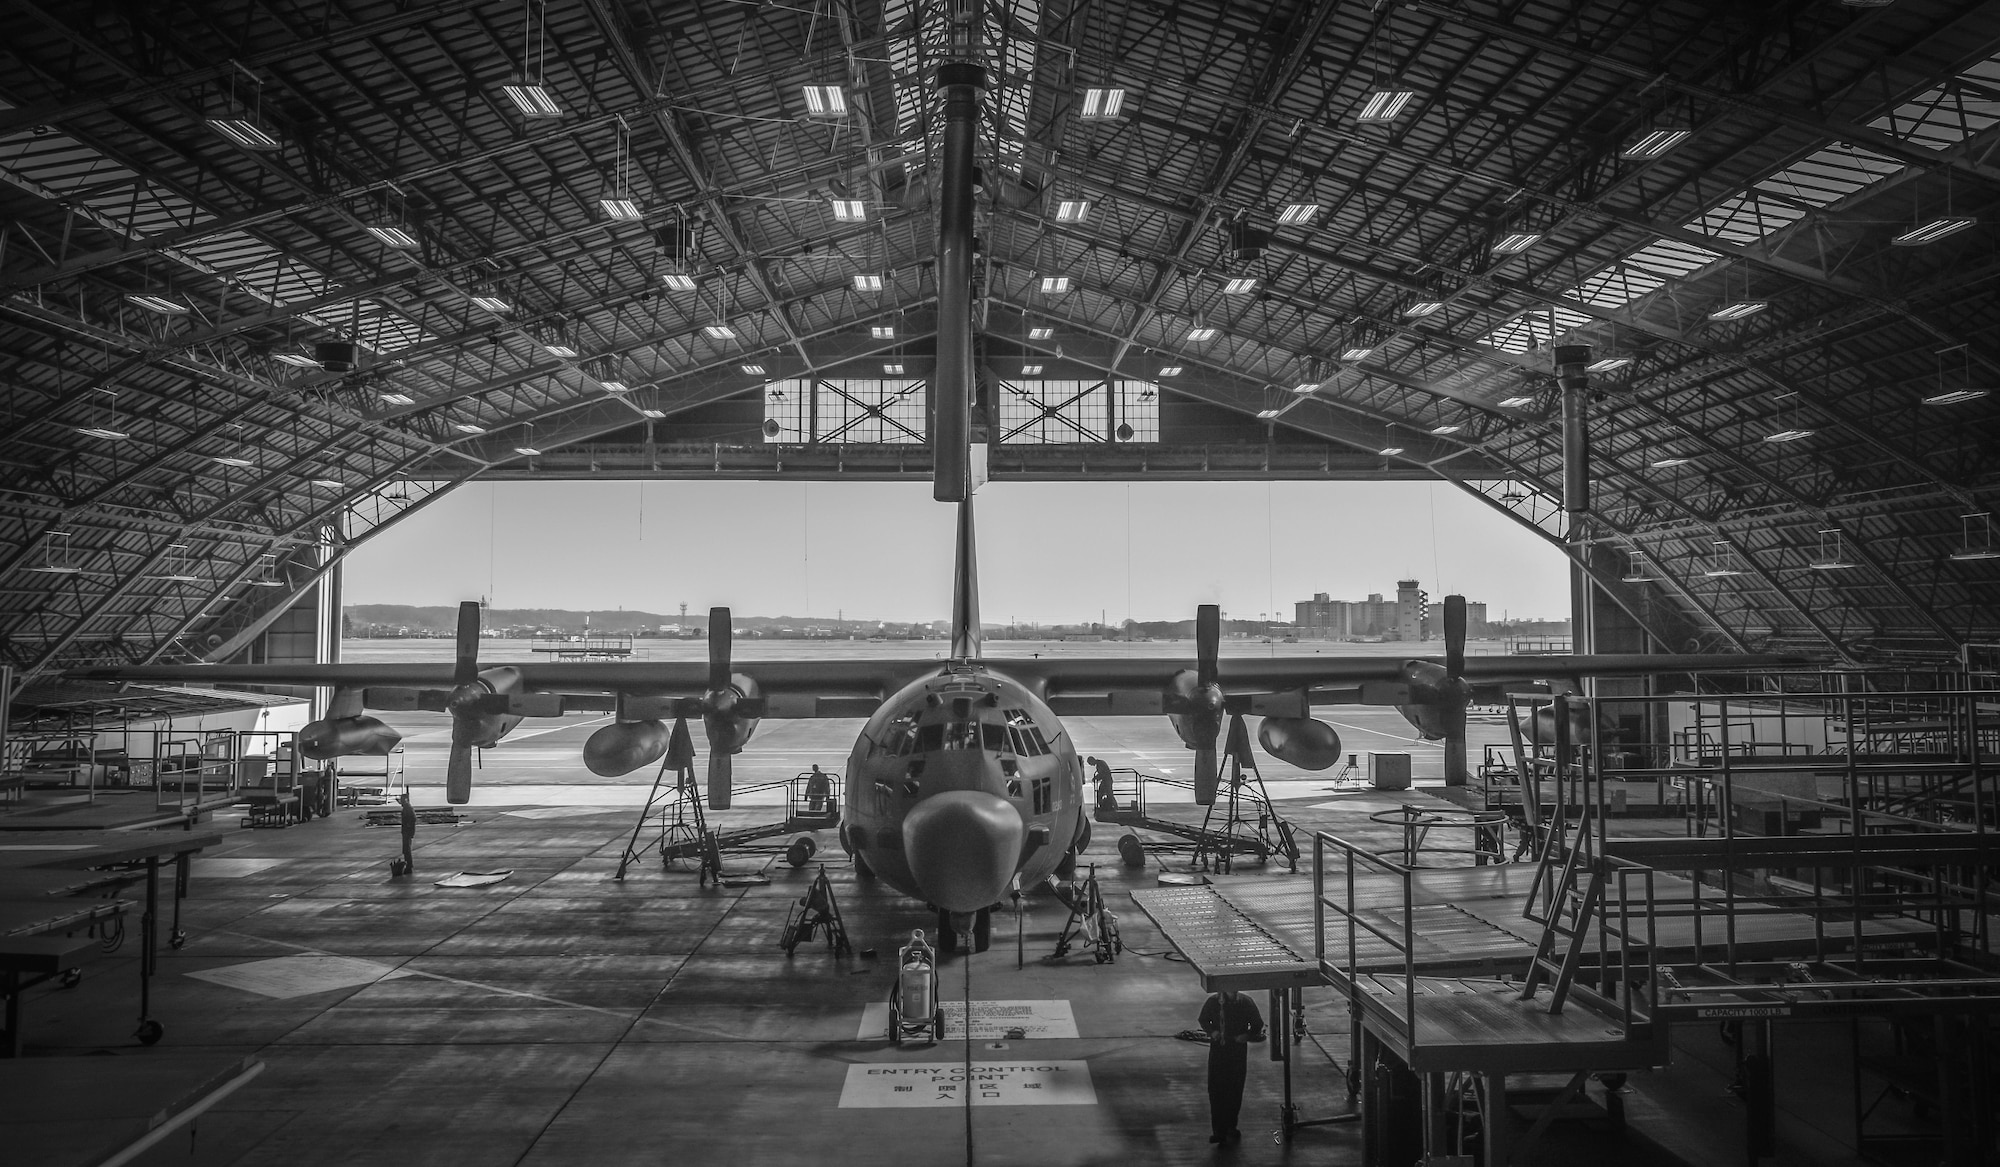 A U.S. Air Force MC-130 Talon II, from Kadena Air Base, Japan, sits in the phase docks to be repaired at Yokota Air Base, Japan, Feb. 19, 2016. The aircraft will enter the phase docks every 540 days for a 14 to 16-day inspection and to be repaired. (U.S. Air Force photo by Senior Airman David Owsianka/Released)